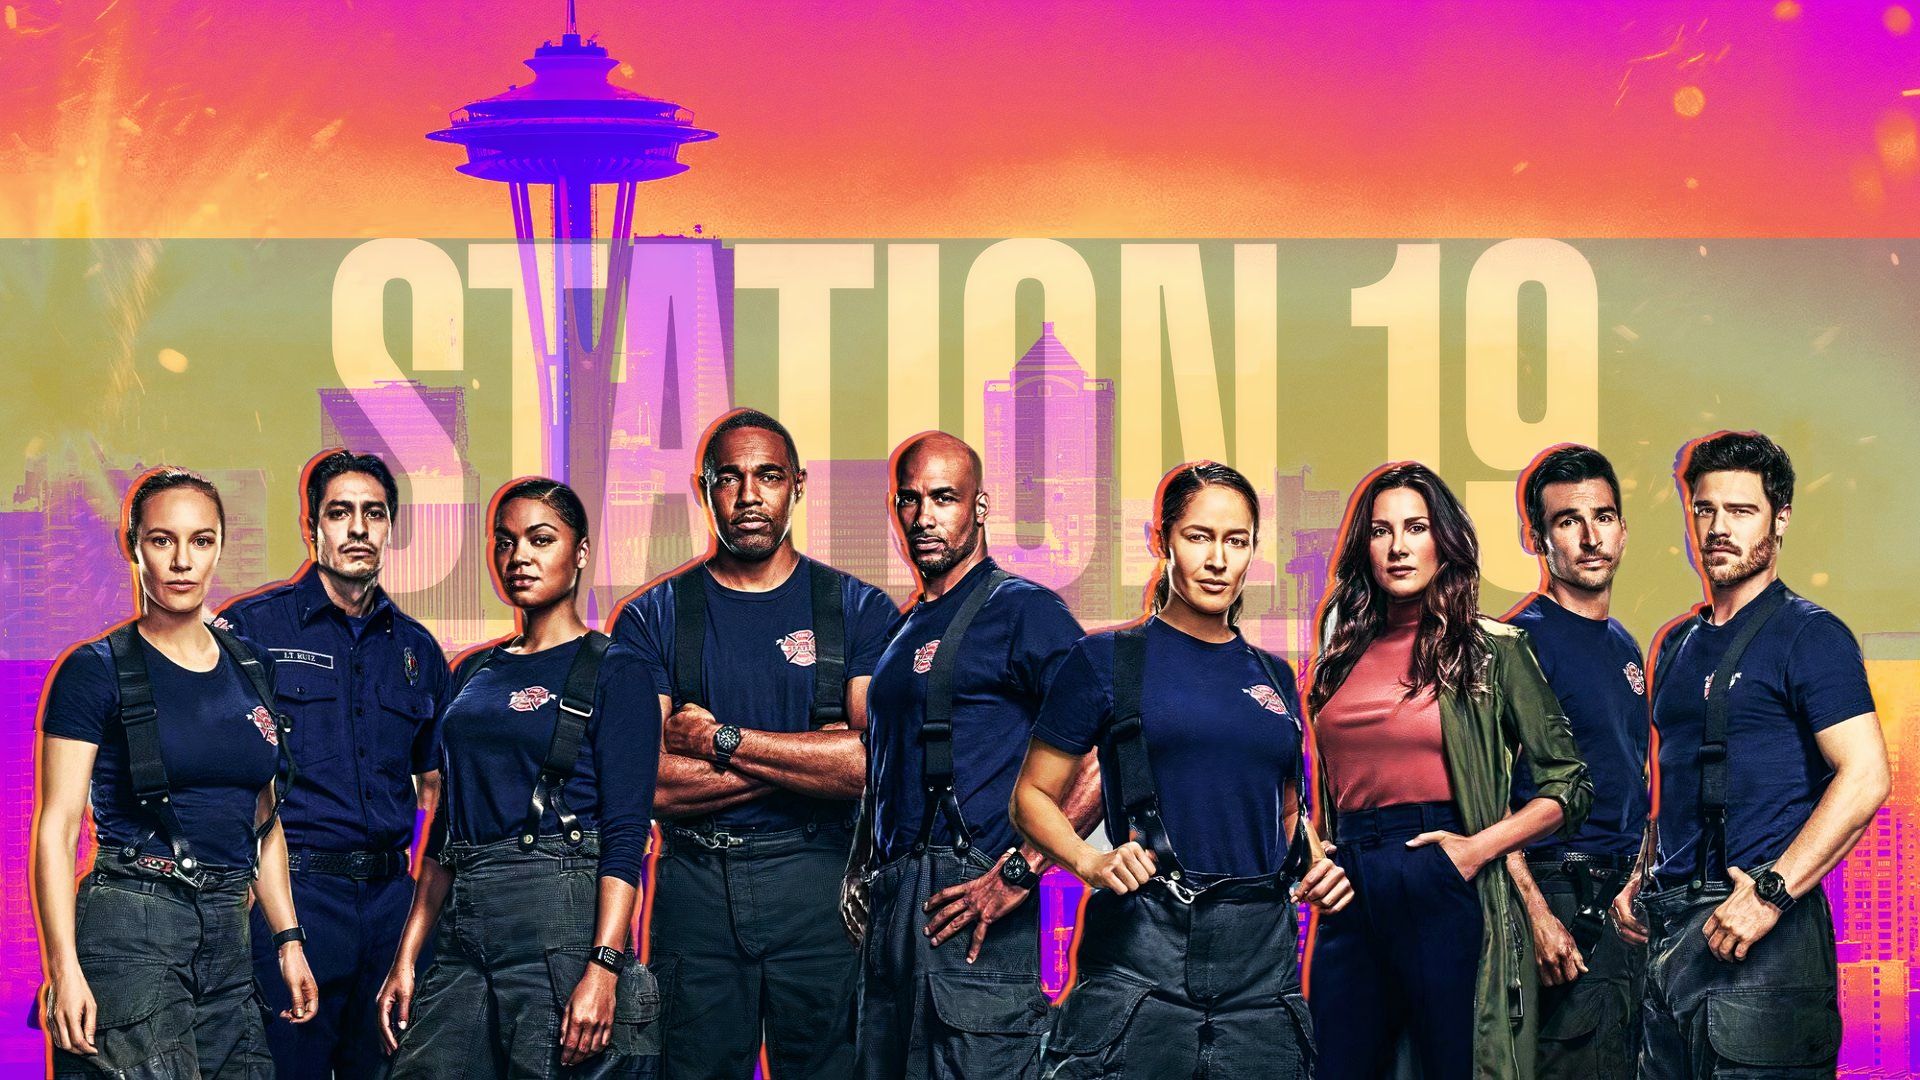 Station 19 Showrunners Zoanne Clack & Peter Paige Explain the Series Finale and Its Shocking Twists